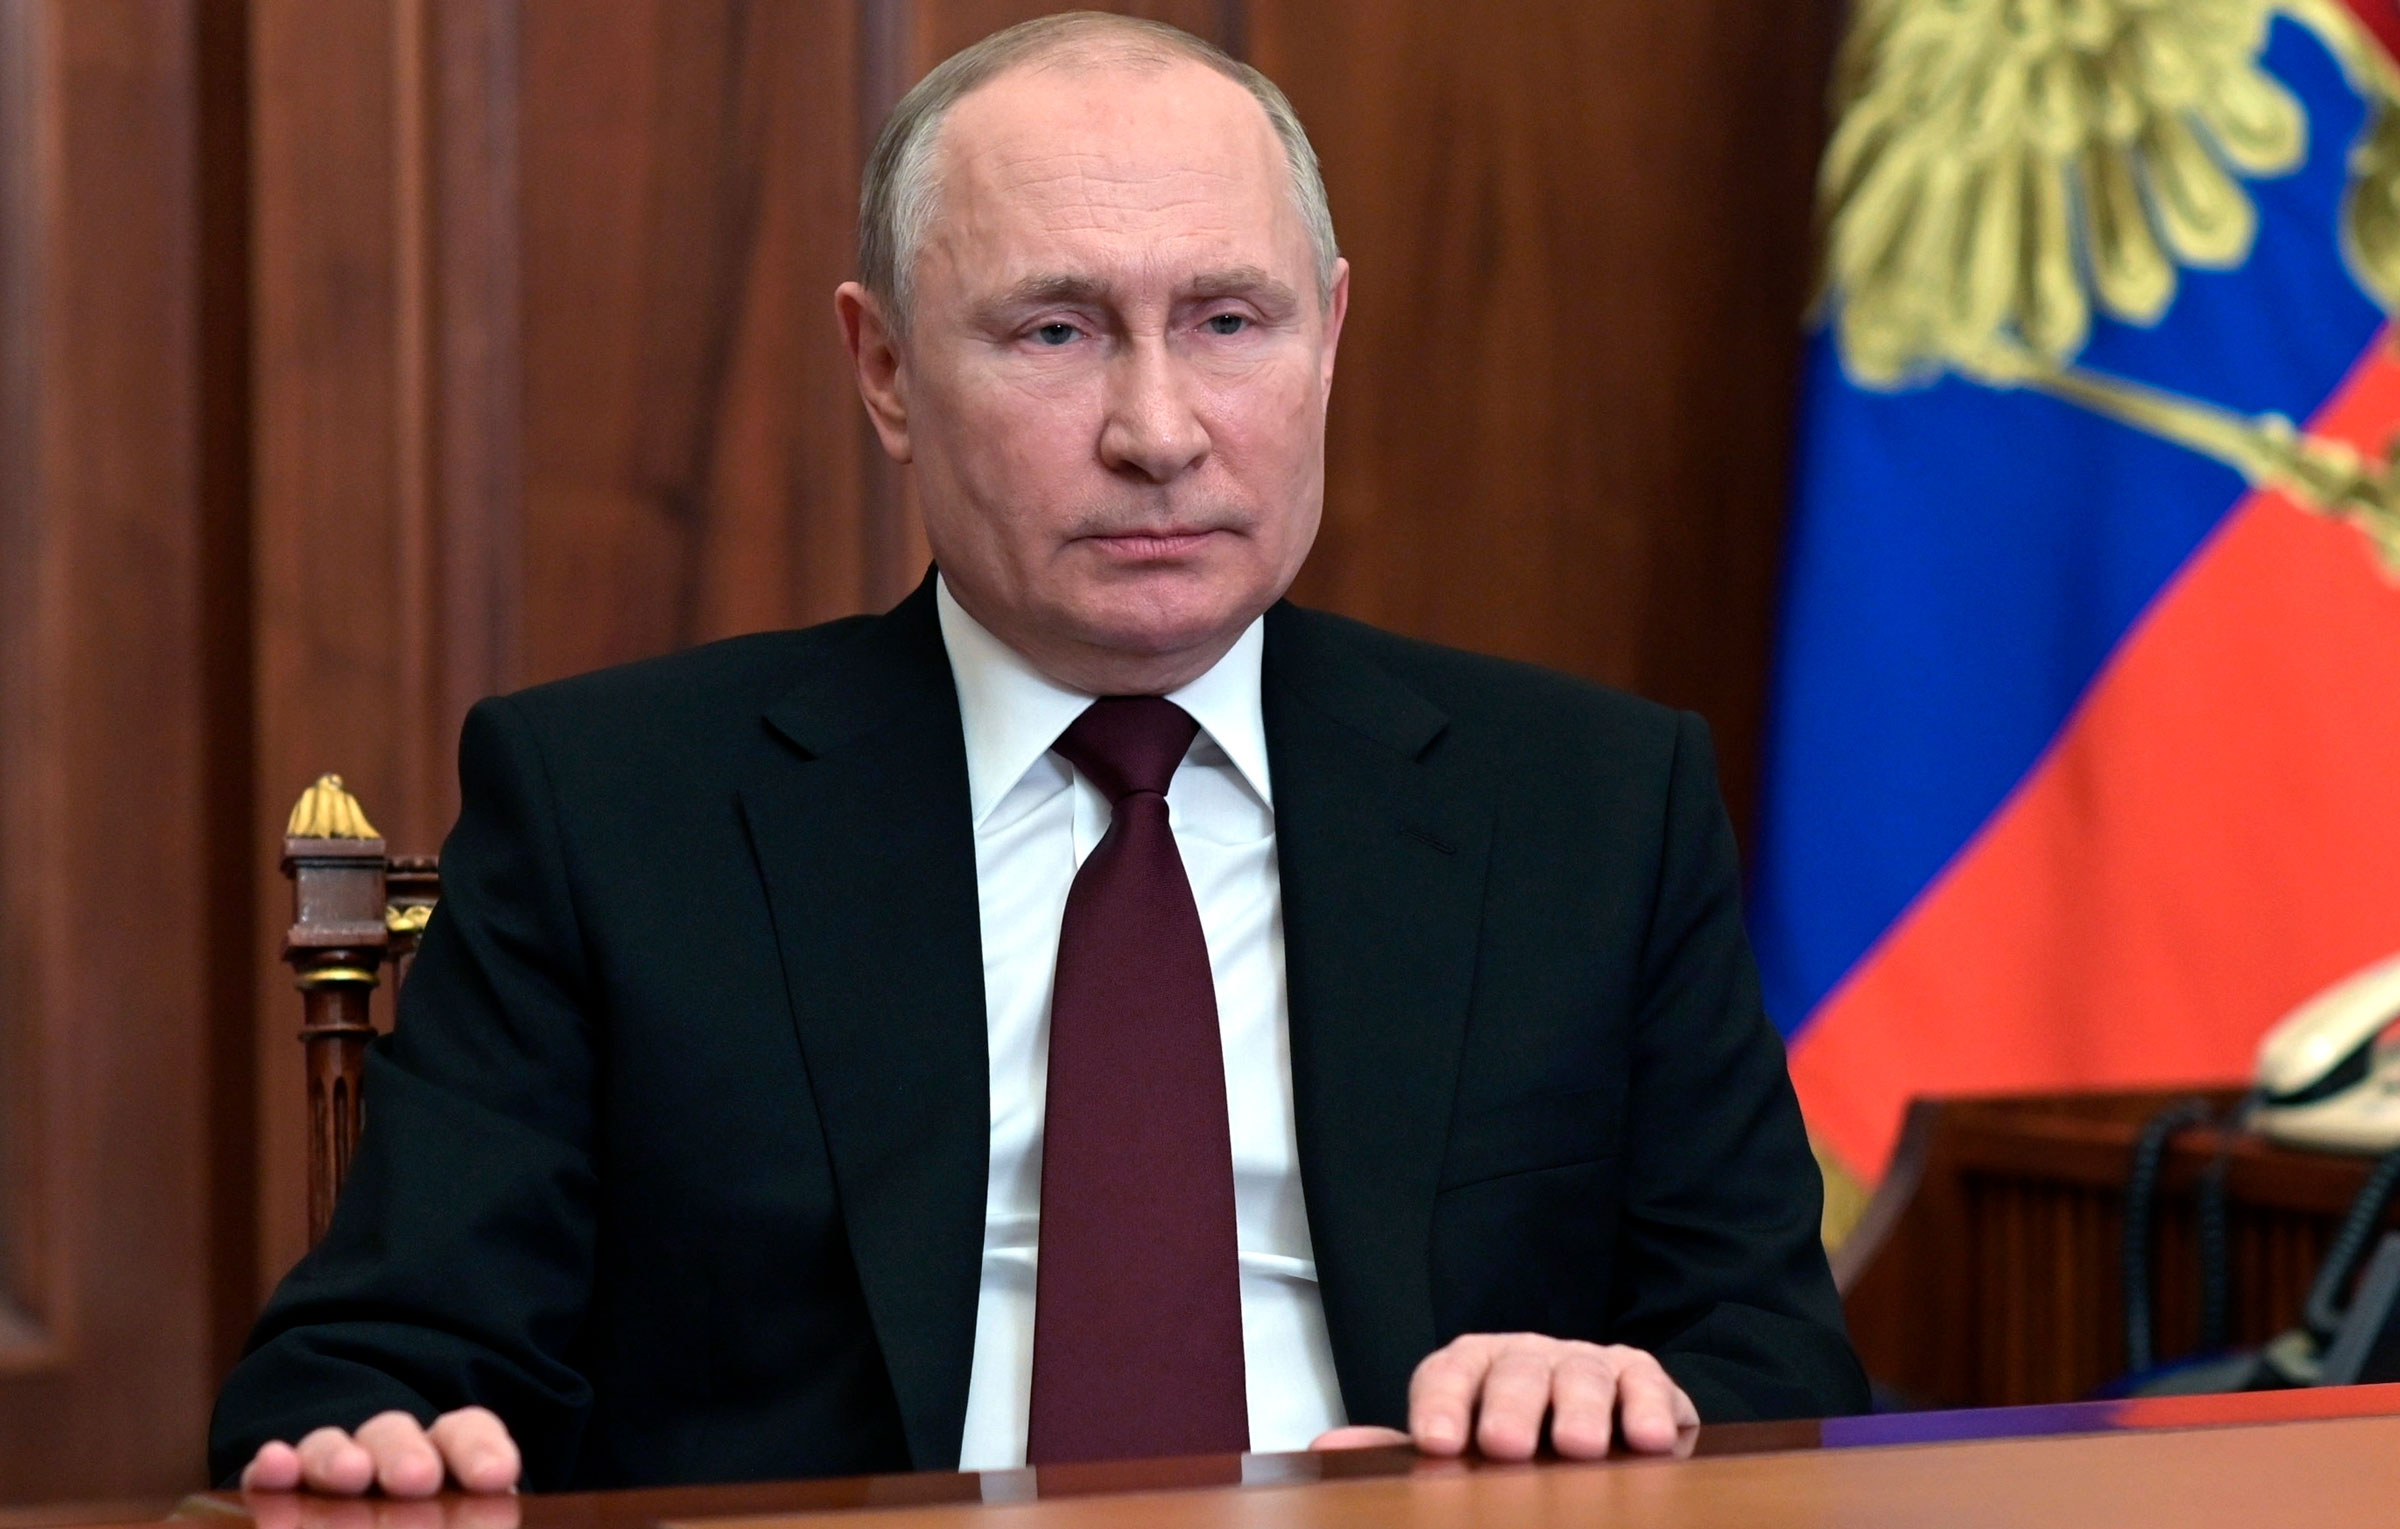 Russian President Vladimir Putin addresses his nation in this file photo from February 21.